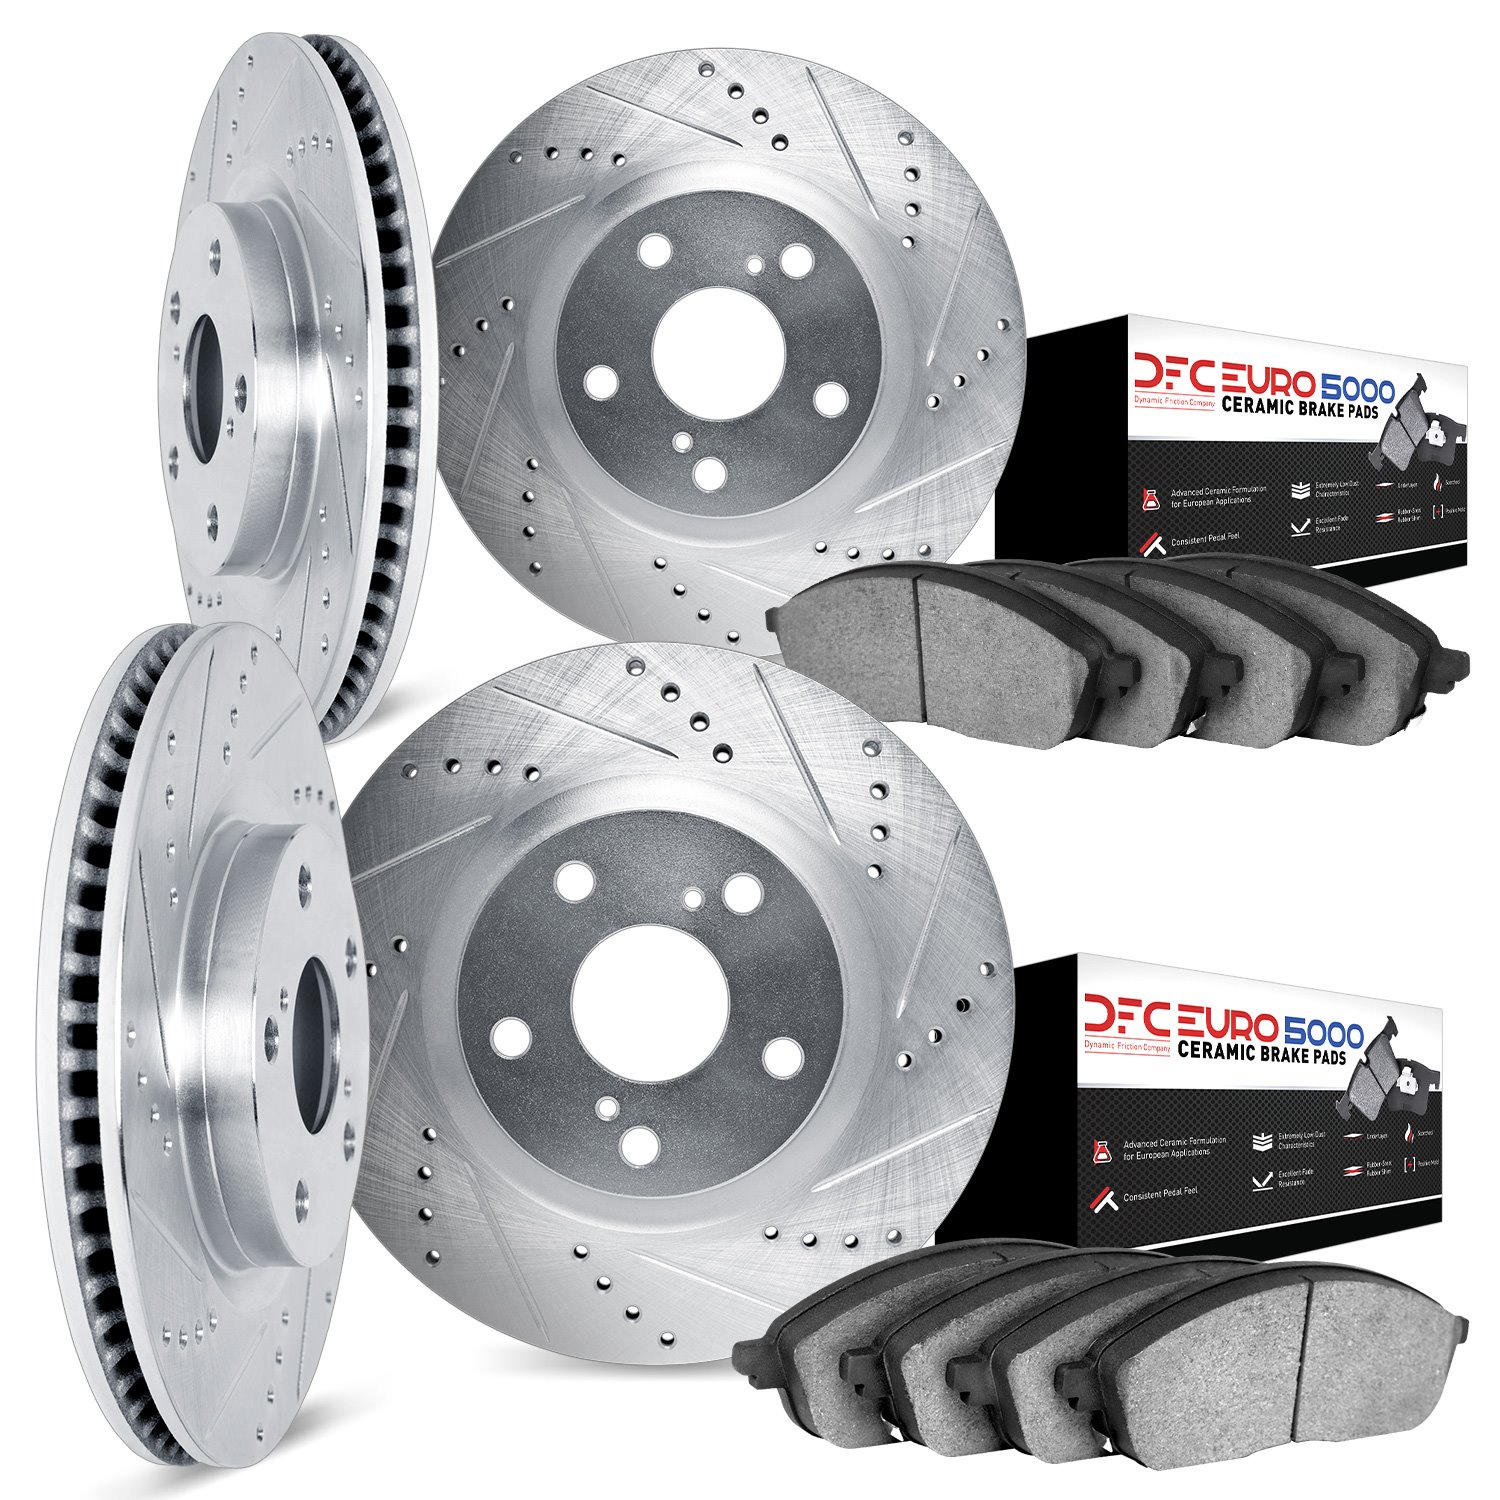 7604-39000 Drilled/Slotted Brake Rotors w/5000 Euro Ceramic Brake Pads Kit [Silver], Fits Select Mopar, Position: Front and Rear